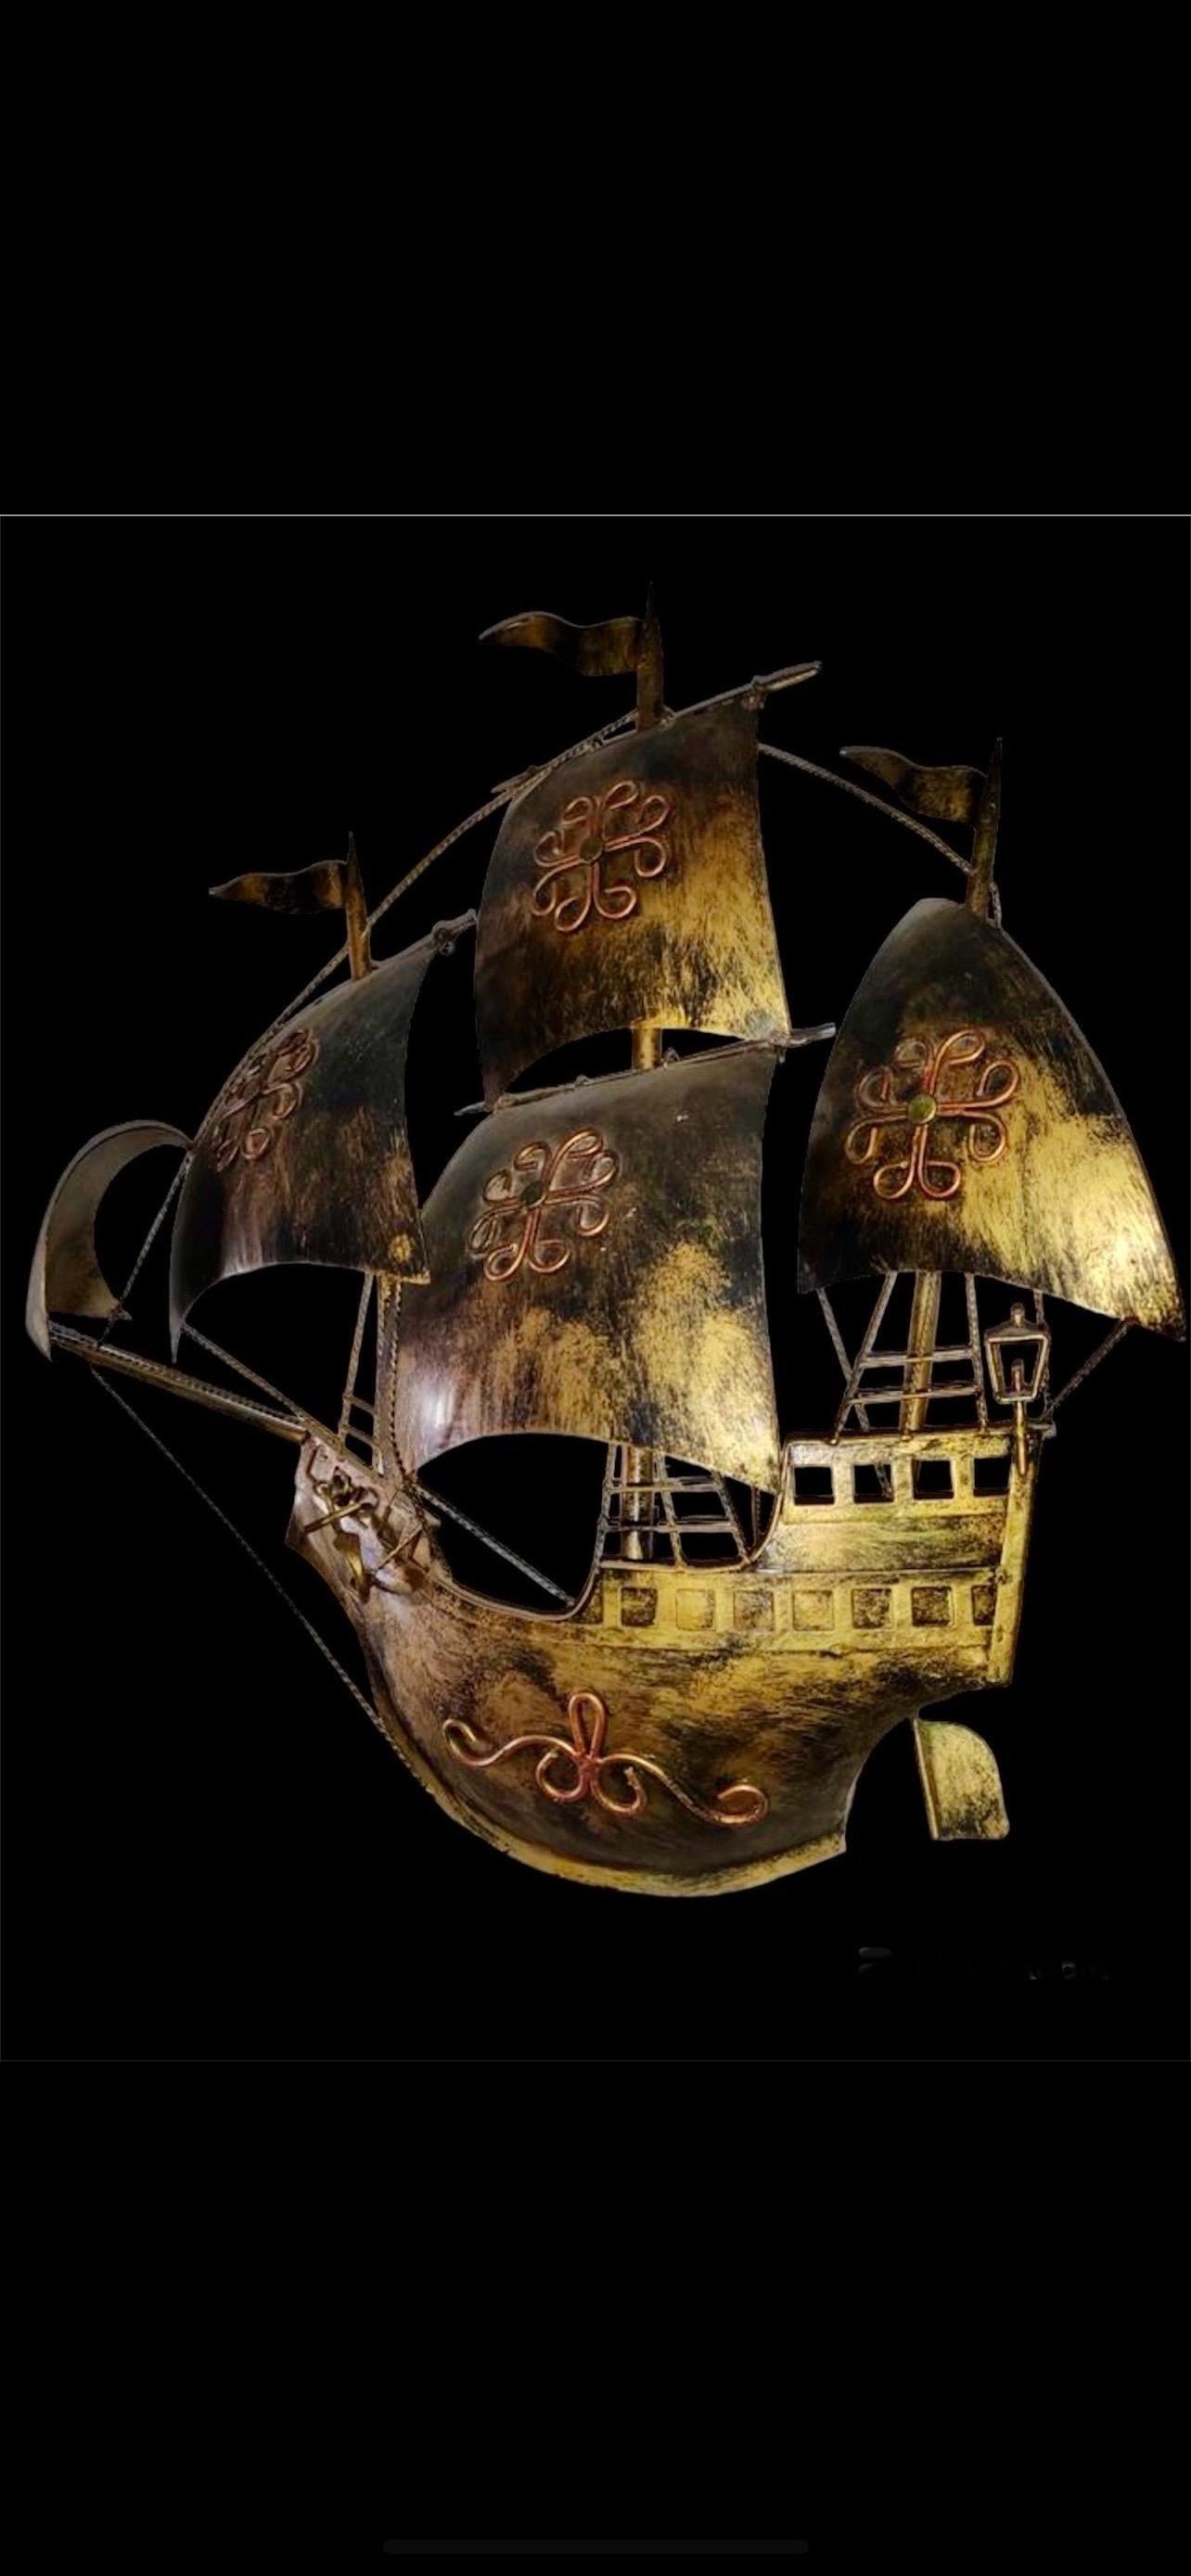 Galleon or sailing ship wall sconce, gilt iron. France / Spain, 1950s
In the style of Gilbert Poillerat.
This pair bateau galleon wall light was handcrafted by artist at the mid-20th century period representing the research of the new world , the